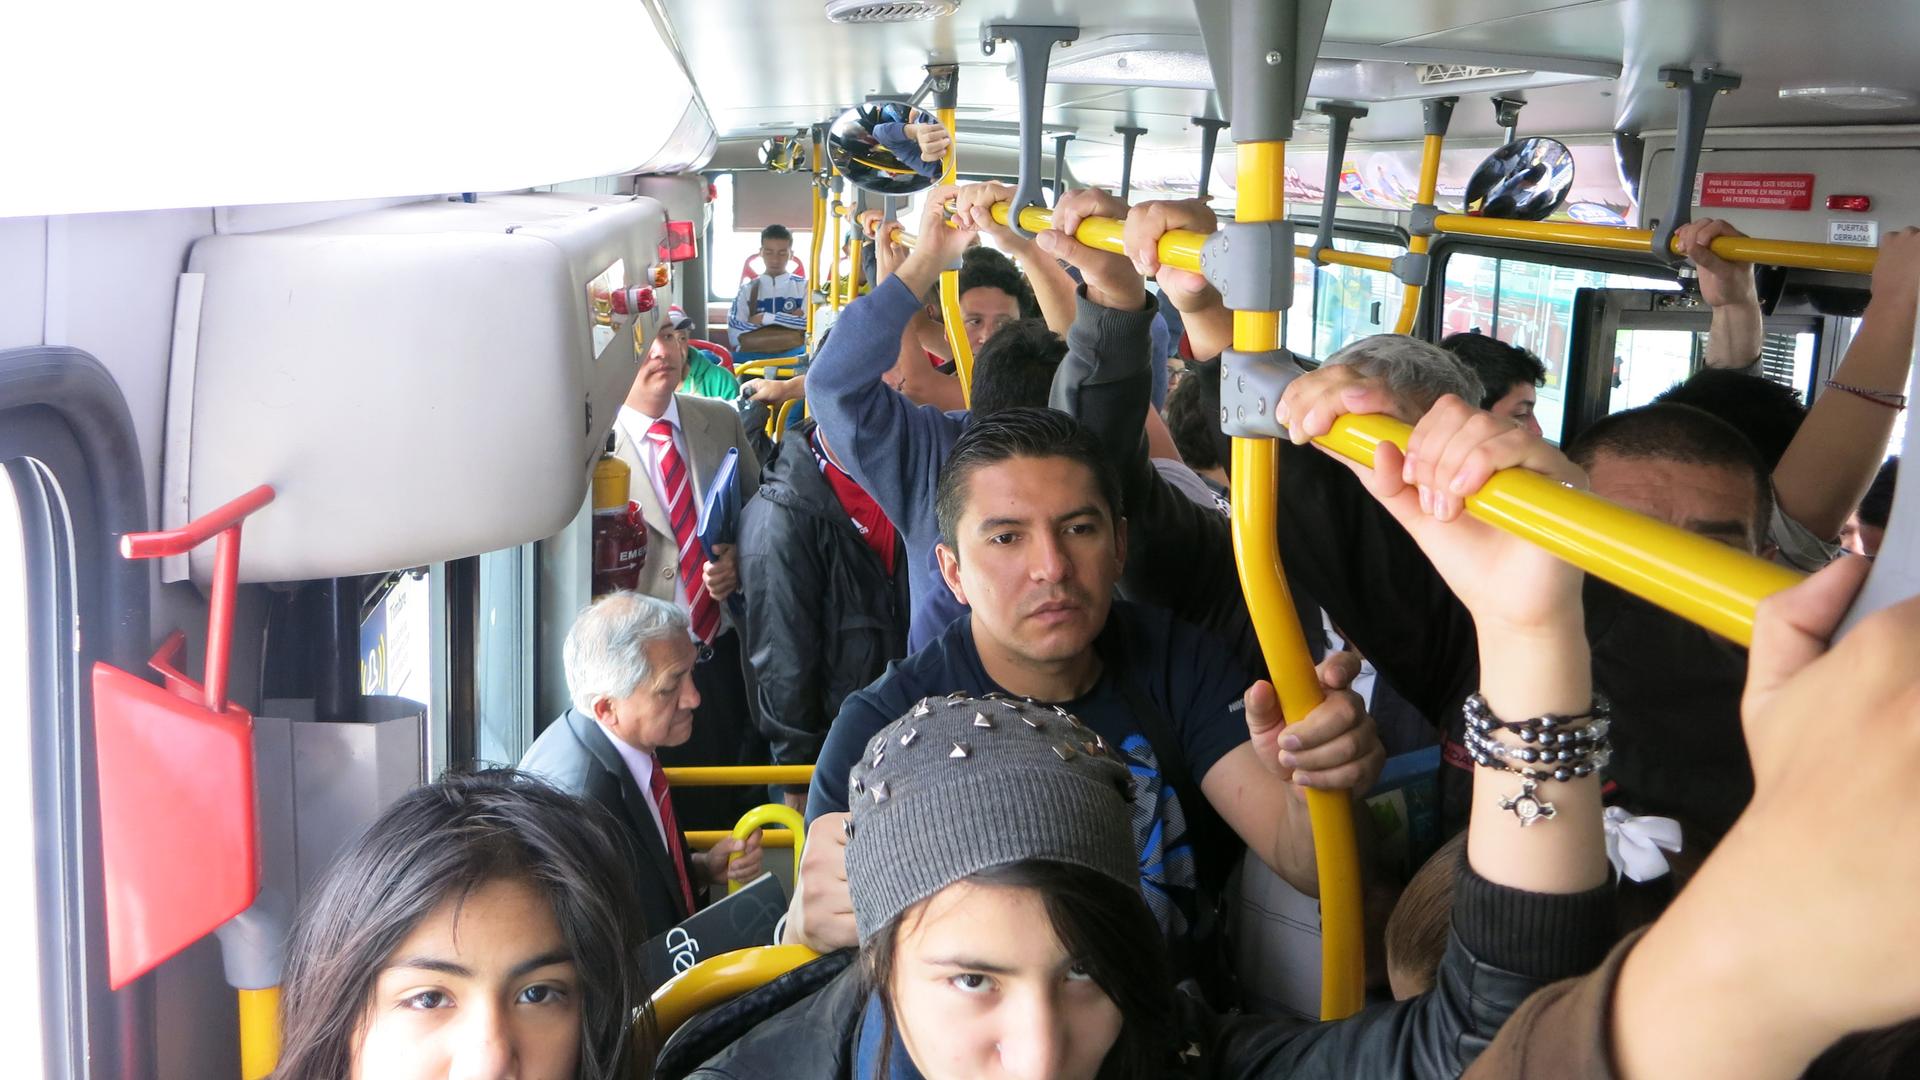 Standing passengers on a crowded bus in Bogotá might not feel so lucky, but at least they’re burning more calories than people who sit during the commute.